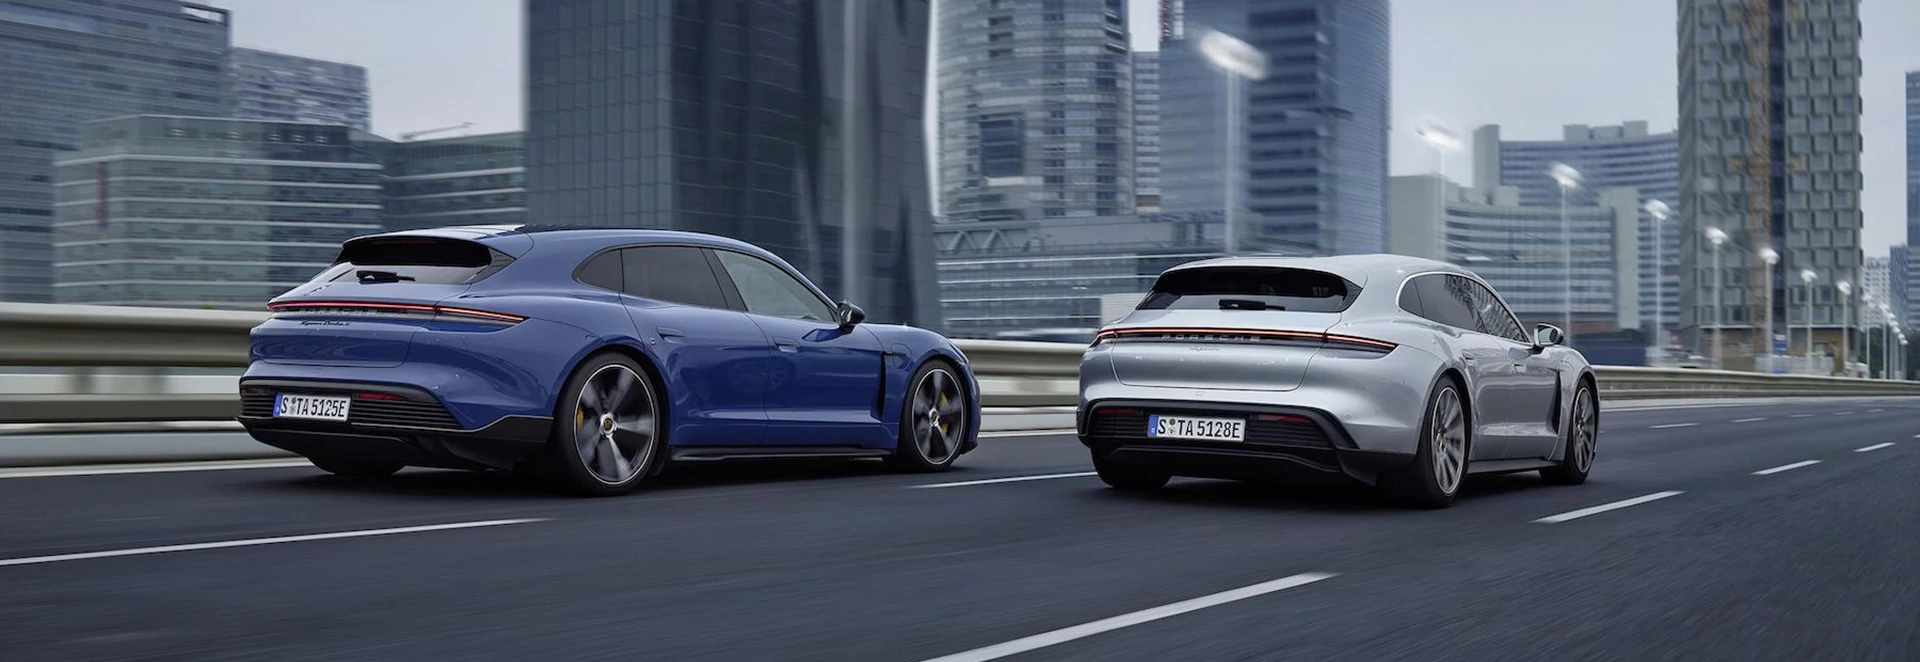 Porsche expands electric Taycan line-up with new Sport Turismo bodystyle 